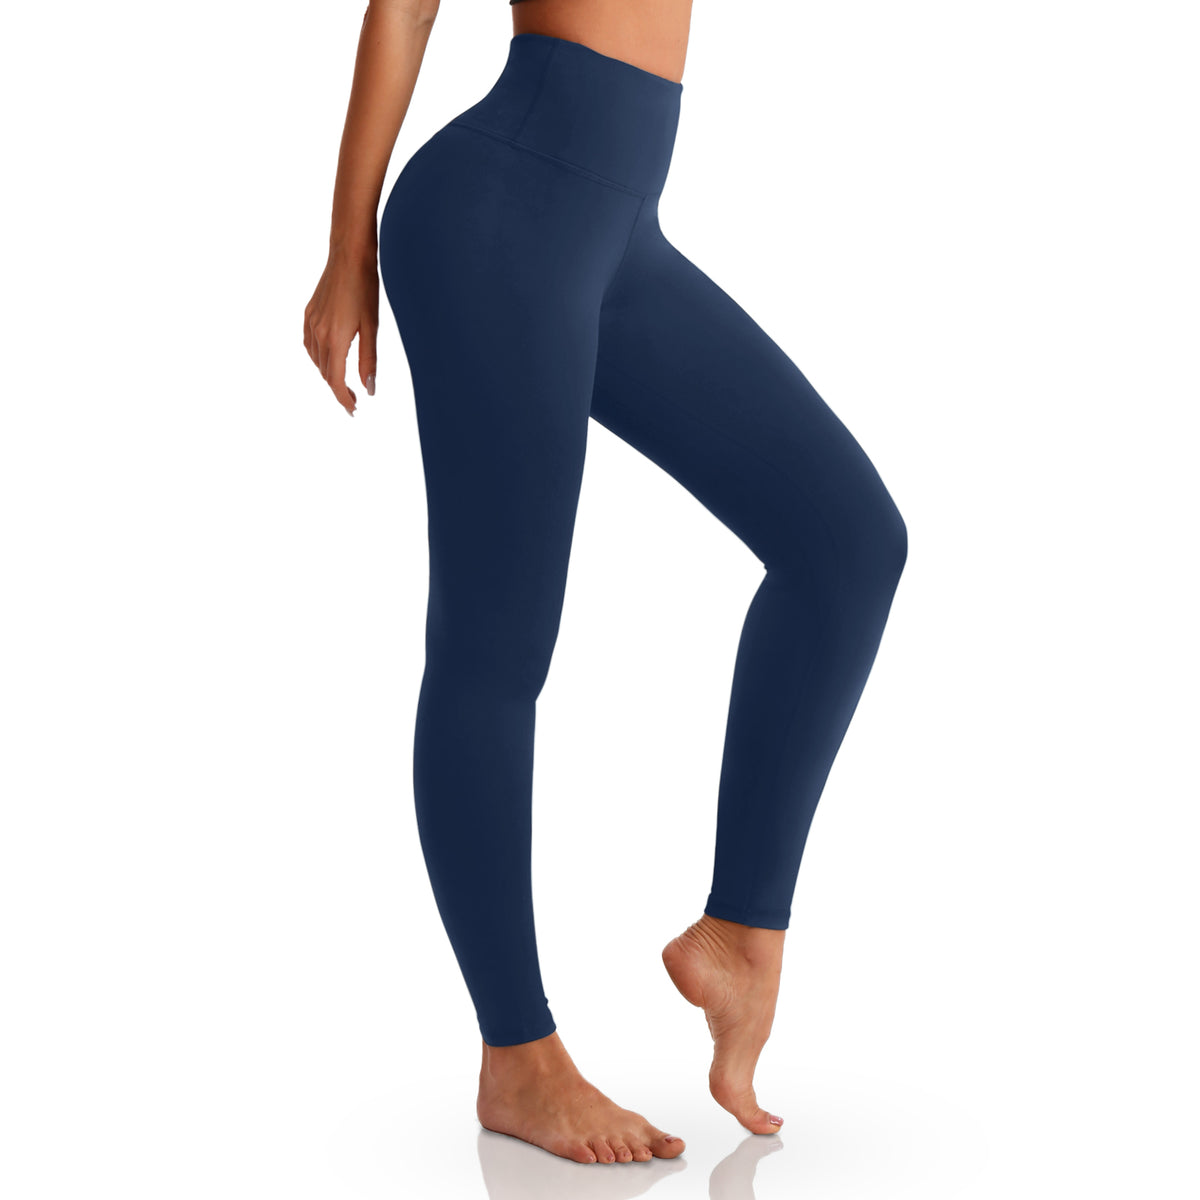 WOMEN'S HIGH WAIST LEGGINGS WITH POCKET ES4 - CABRALLY